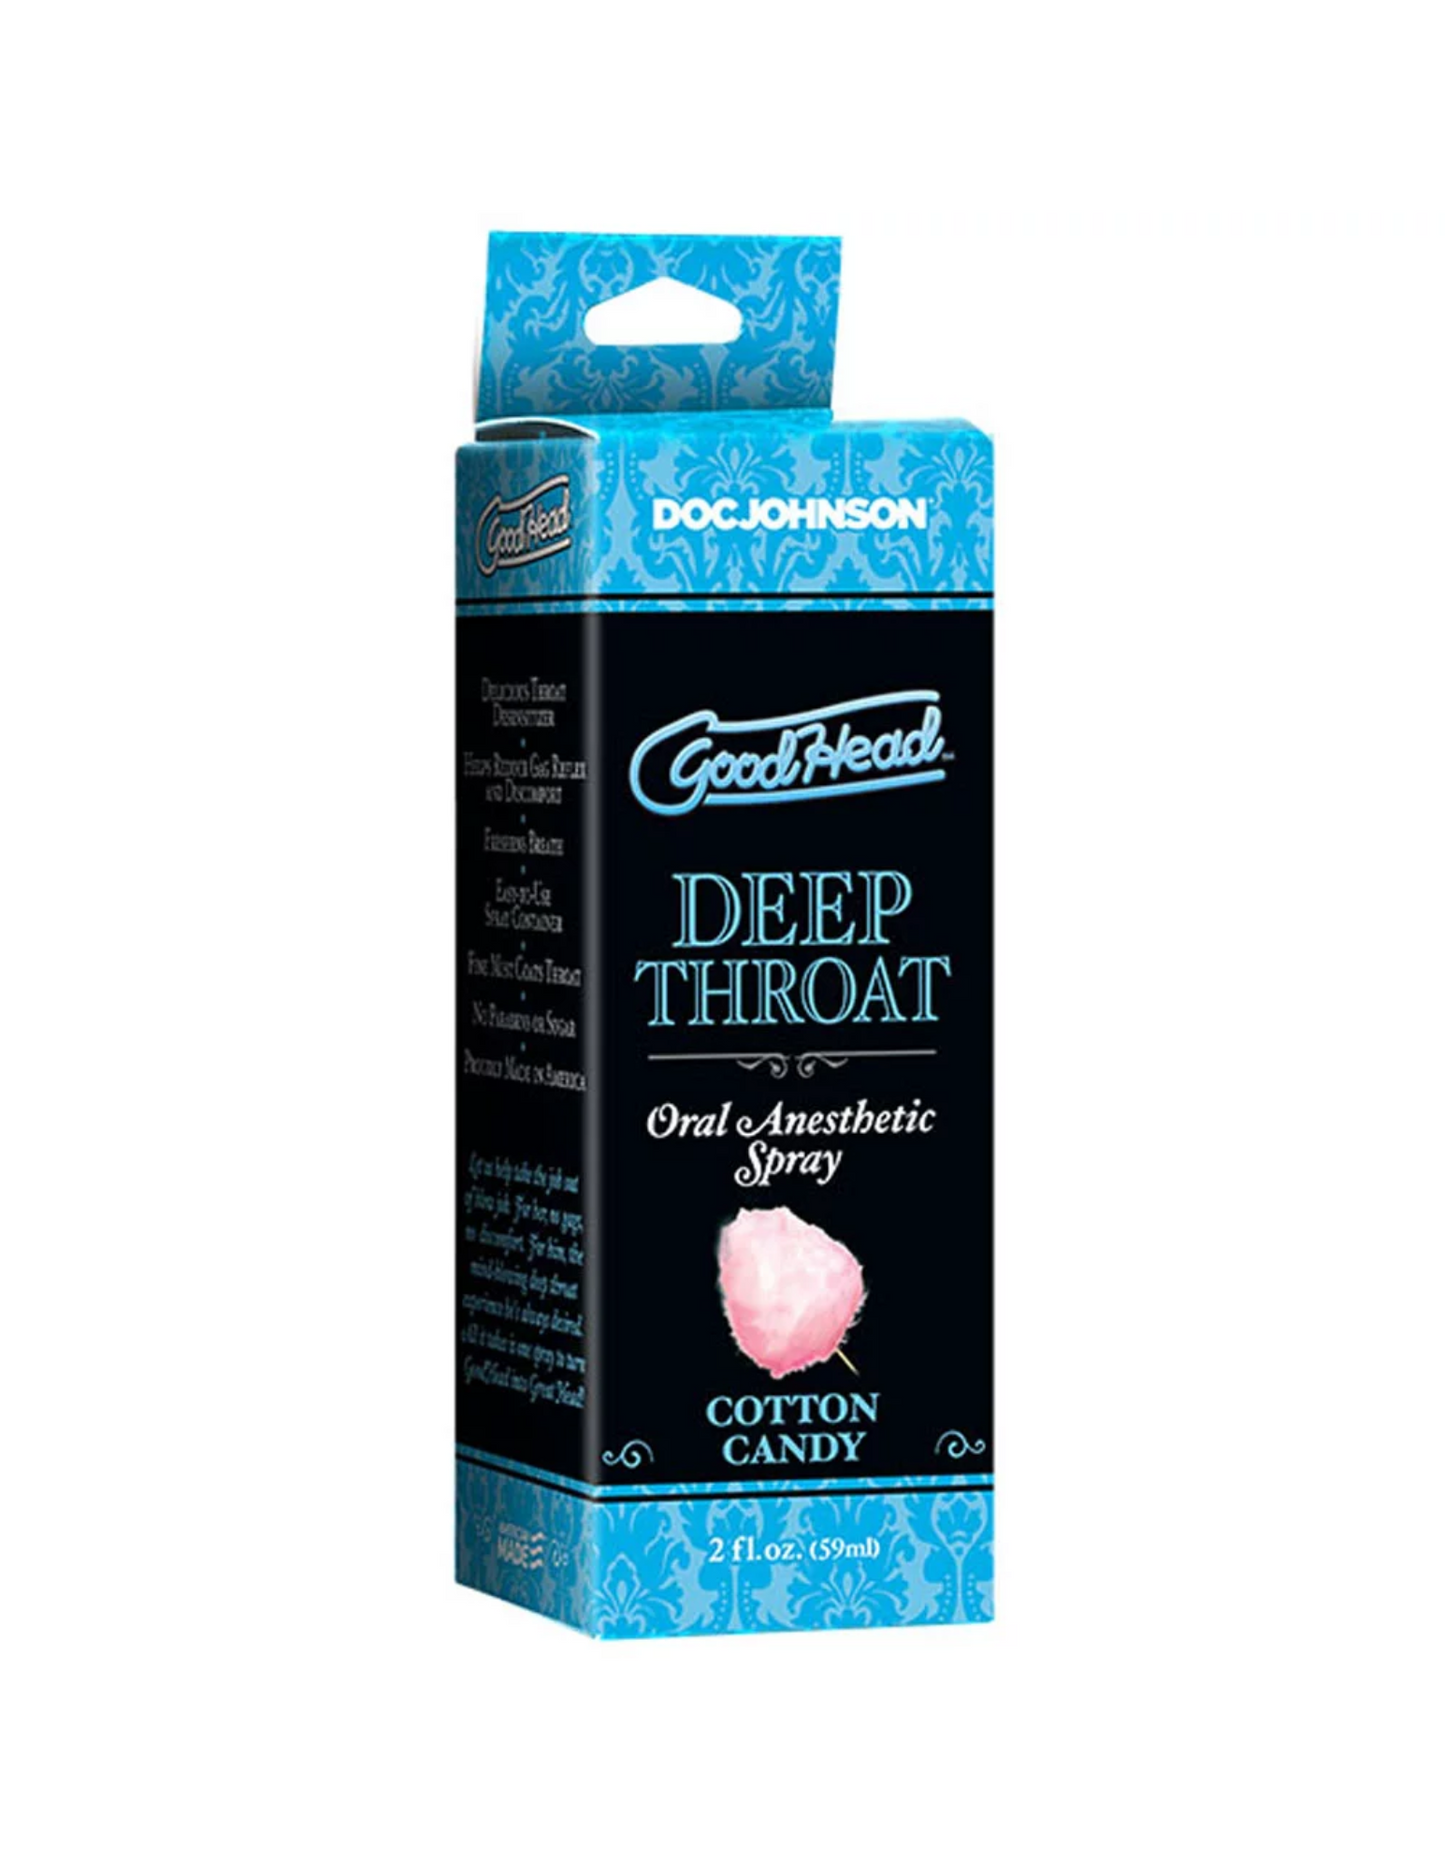 Deep Throat Oral Anesthetic Spray 2oz in its box (cotton candy).